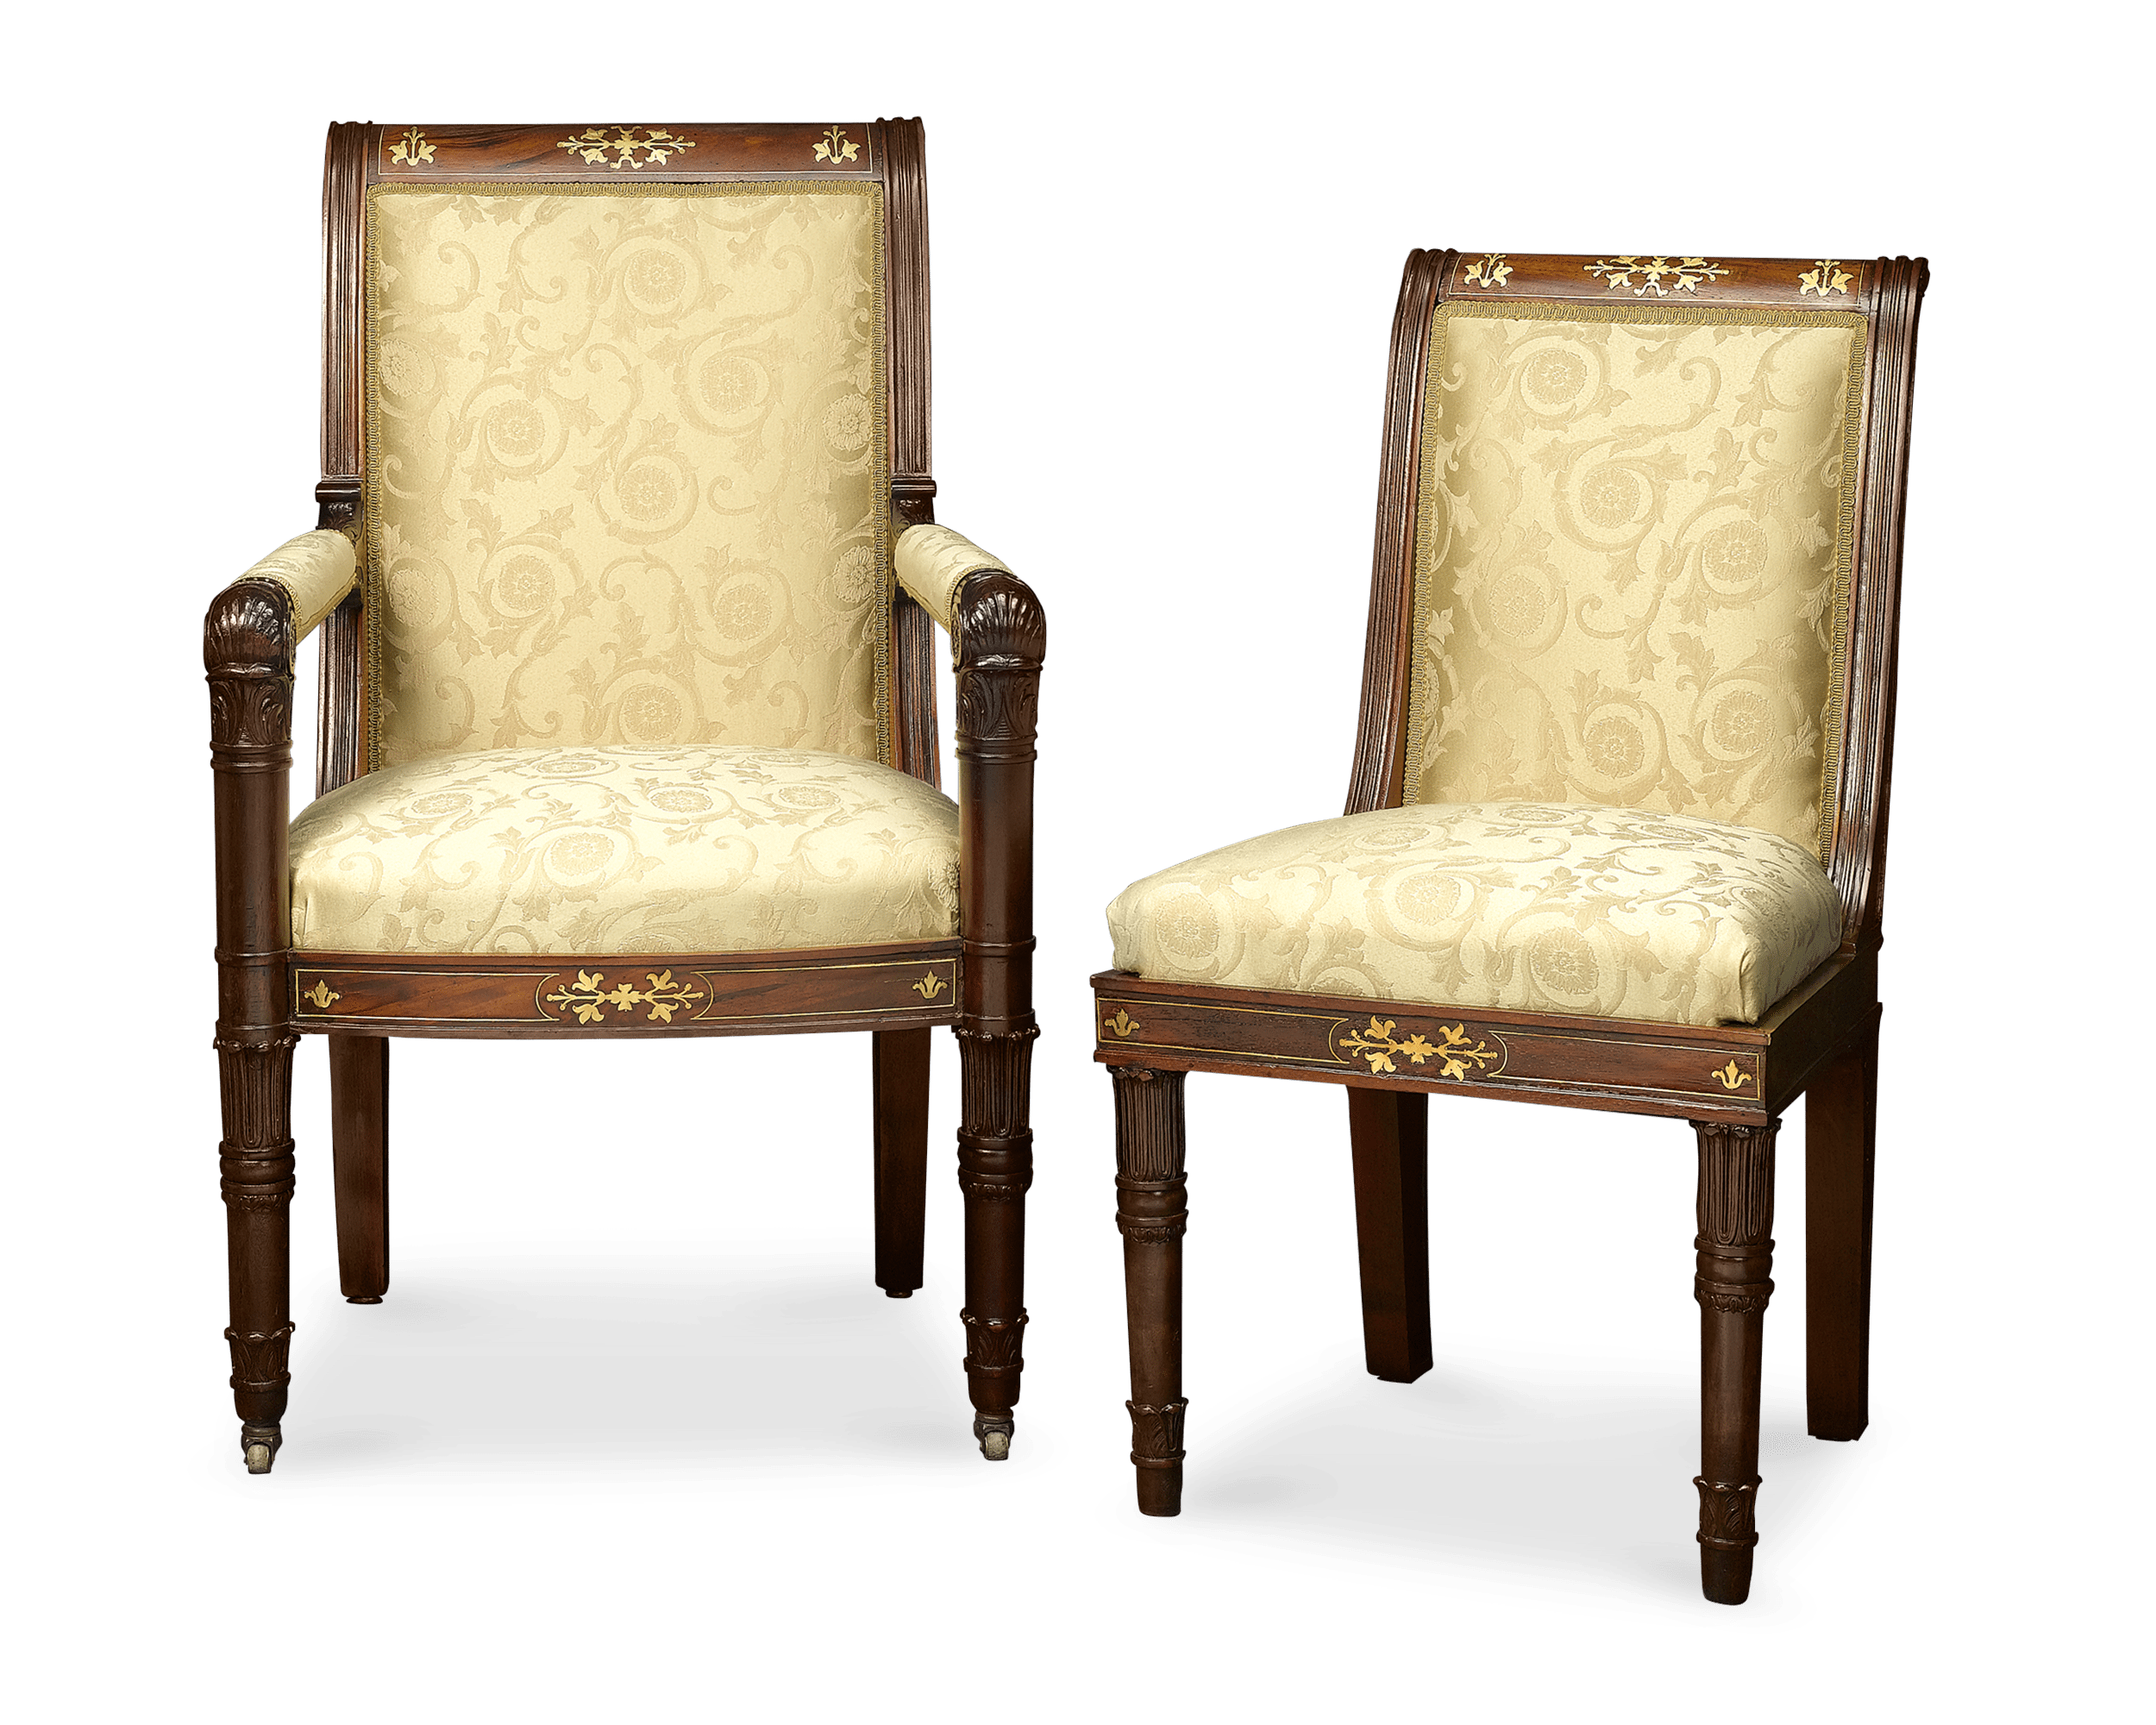 The 12 stately Neoclassical chairs are all upholstered in rich, cream-colored brocade